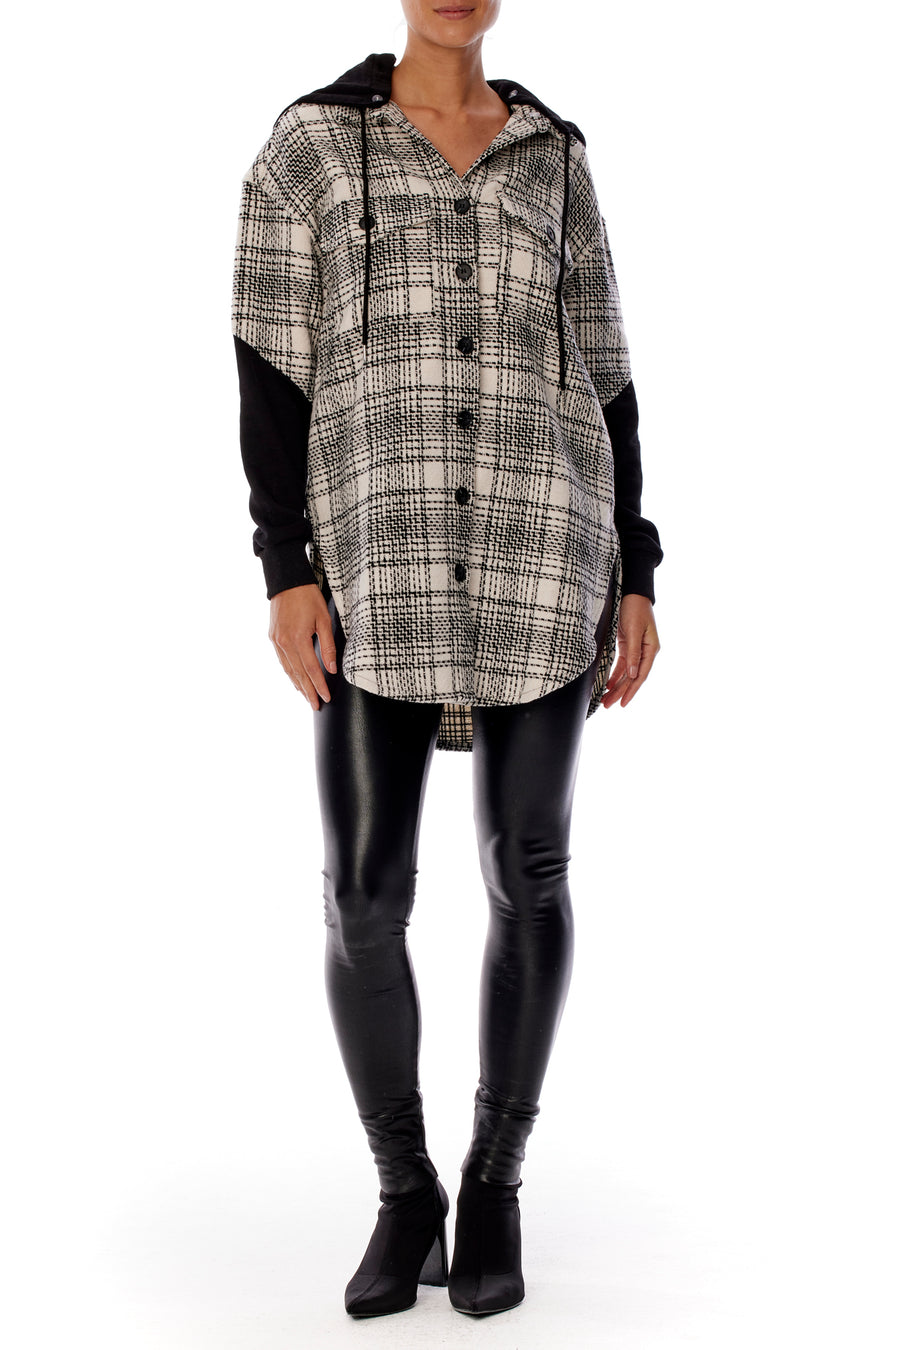 Cozy button up, black and white plaid hoodie with shirttail hem, contrasting sleeve & front pockets